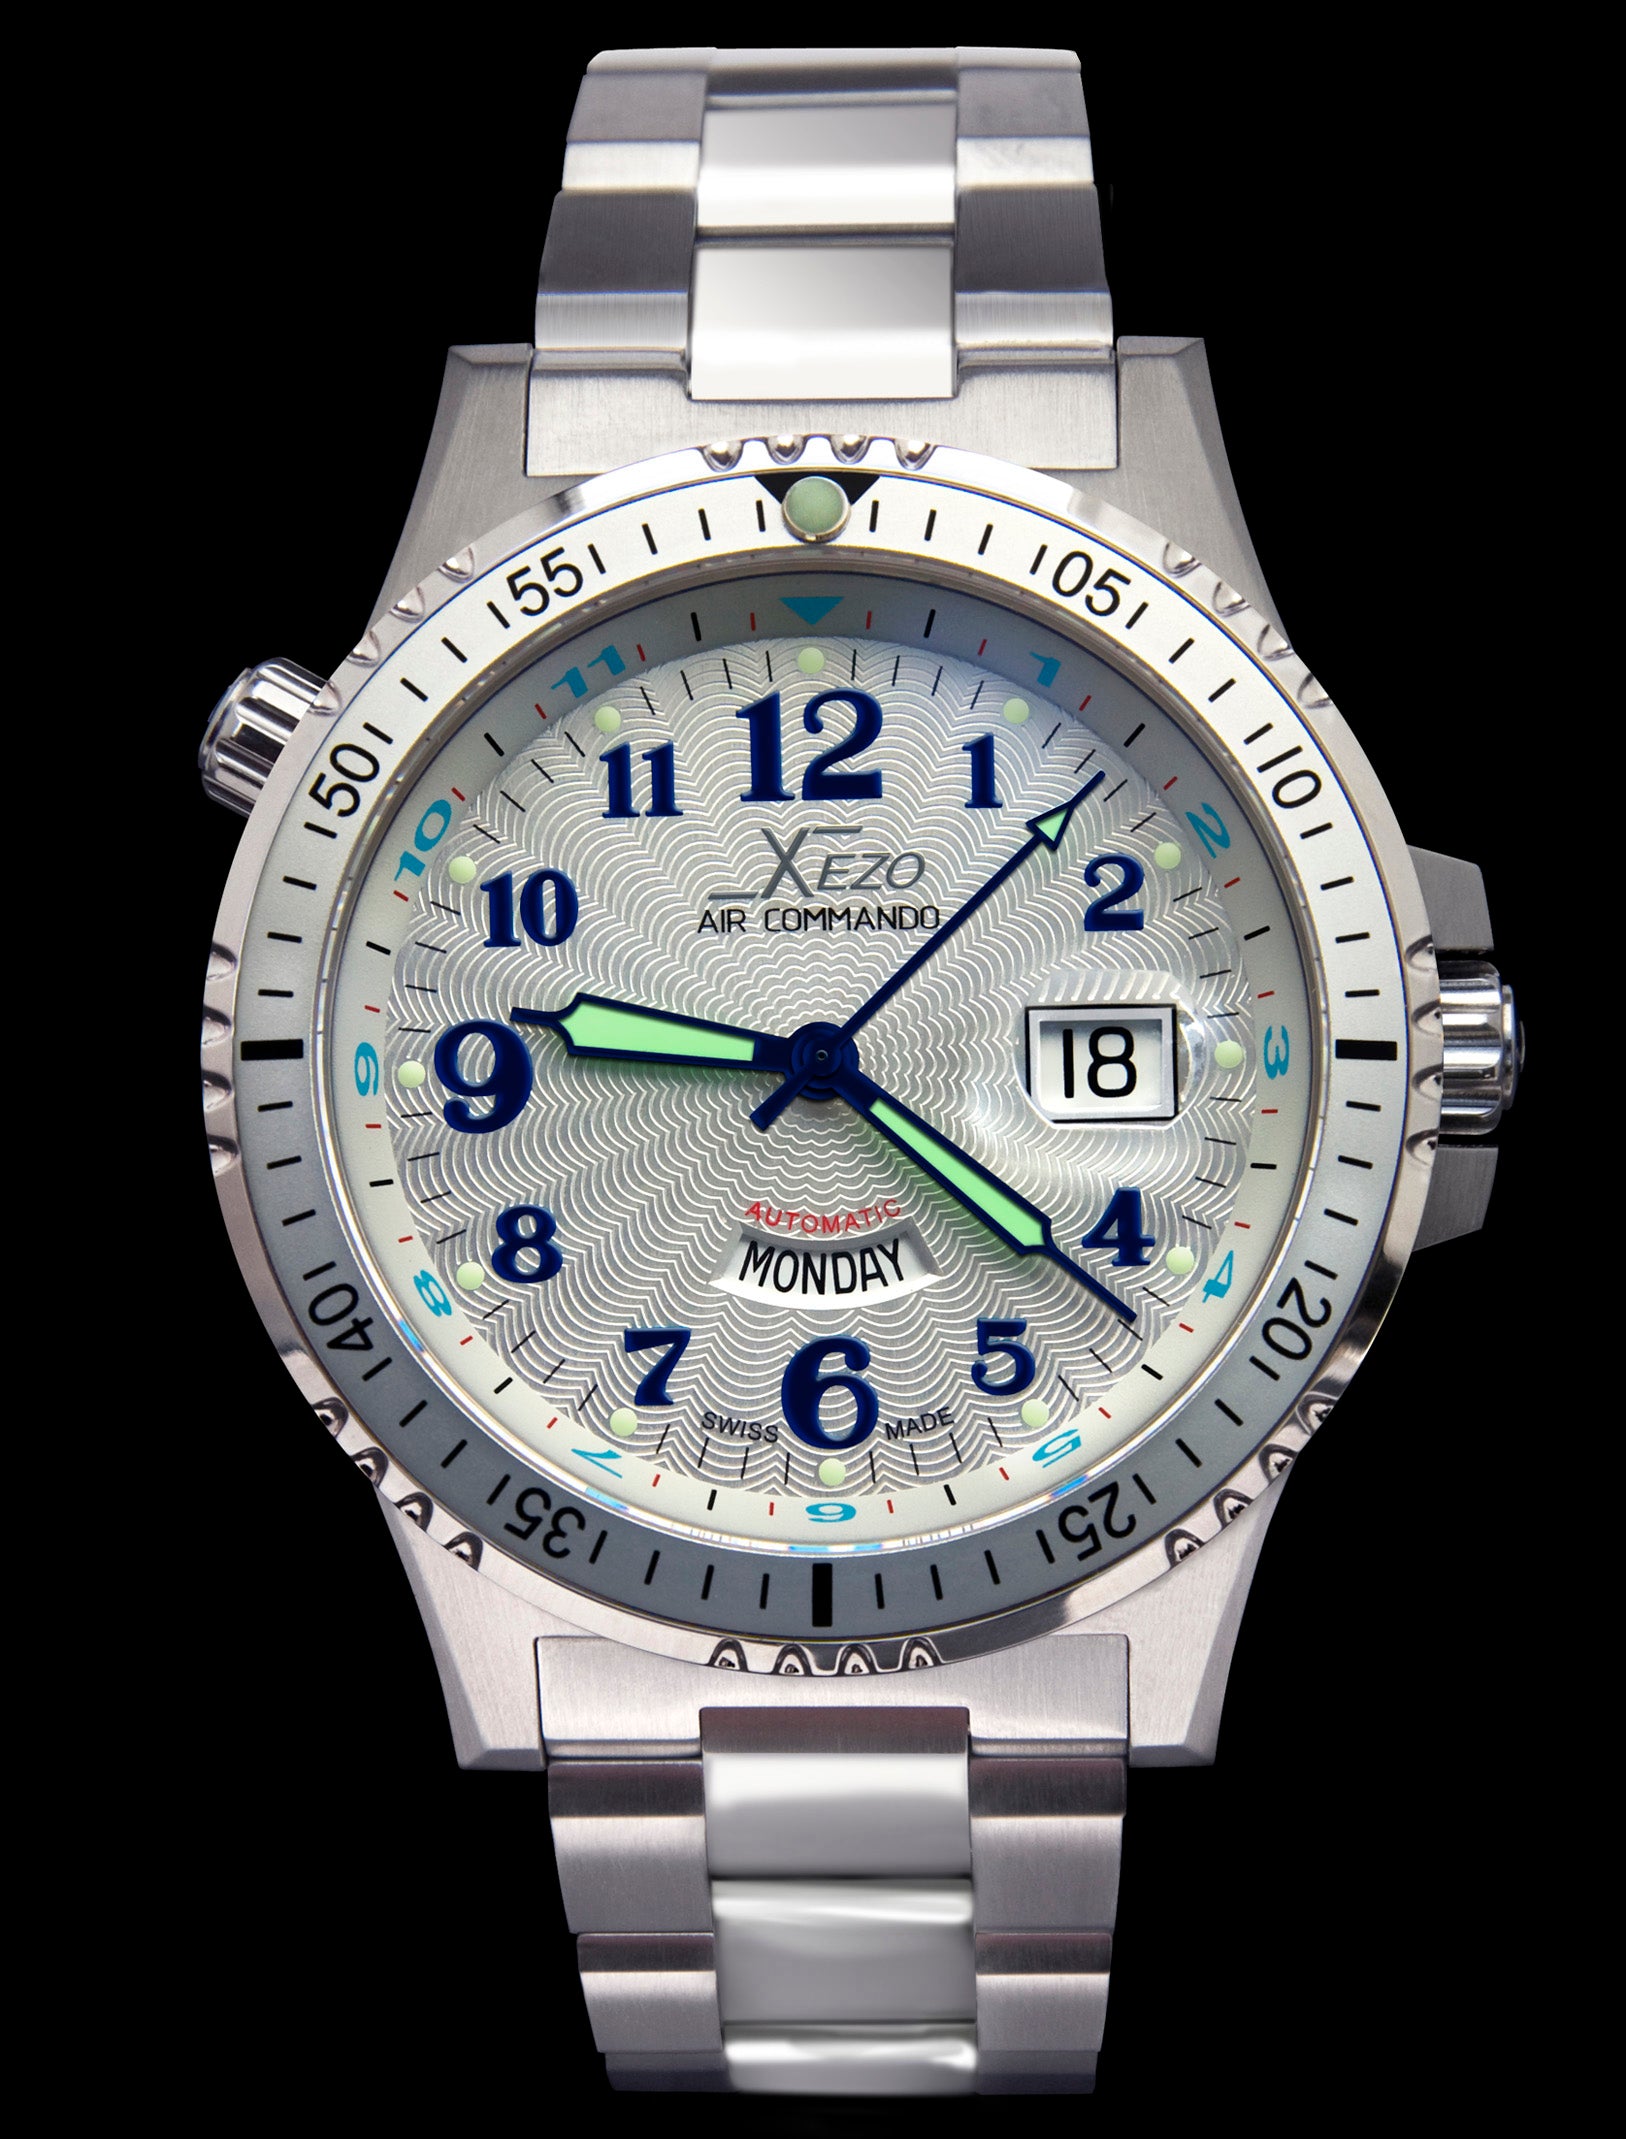 Xezo - Front view of the Air Commando D44 S (Silver Guilloché dial) watch